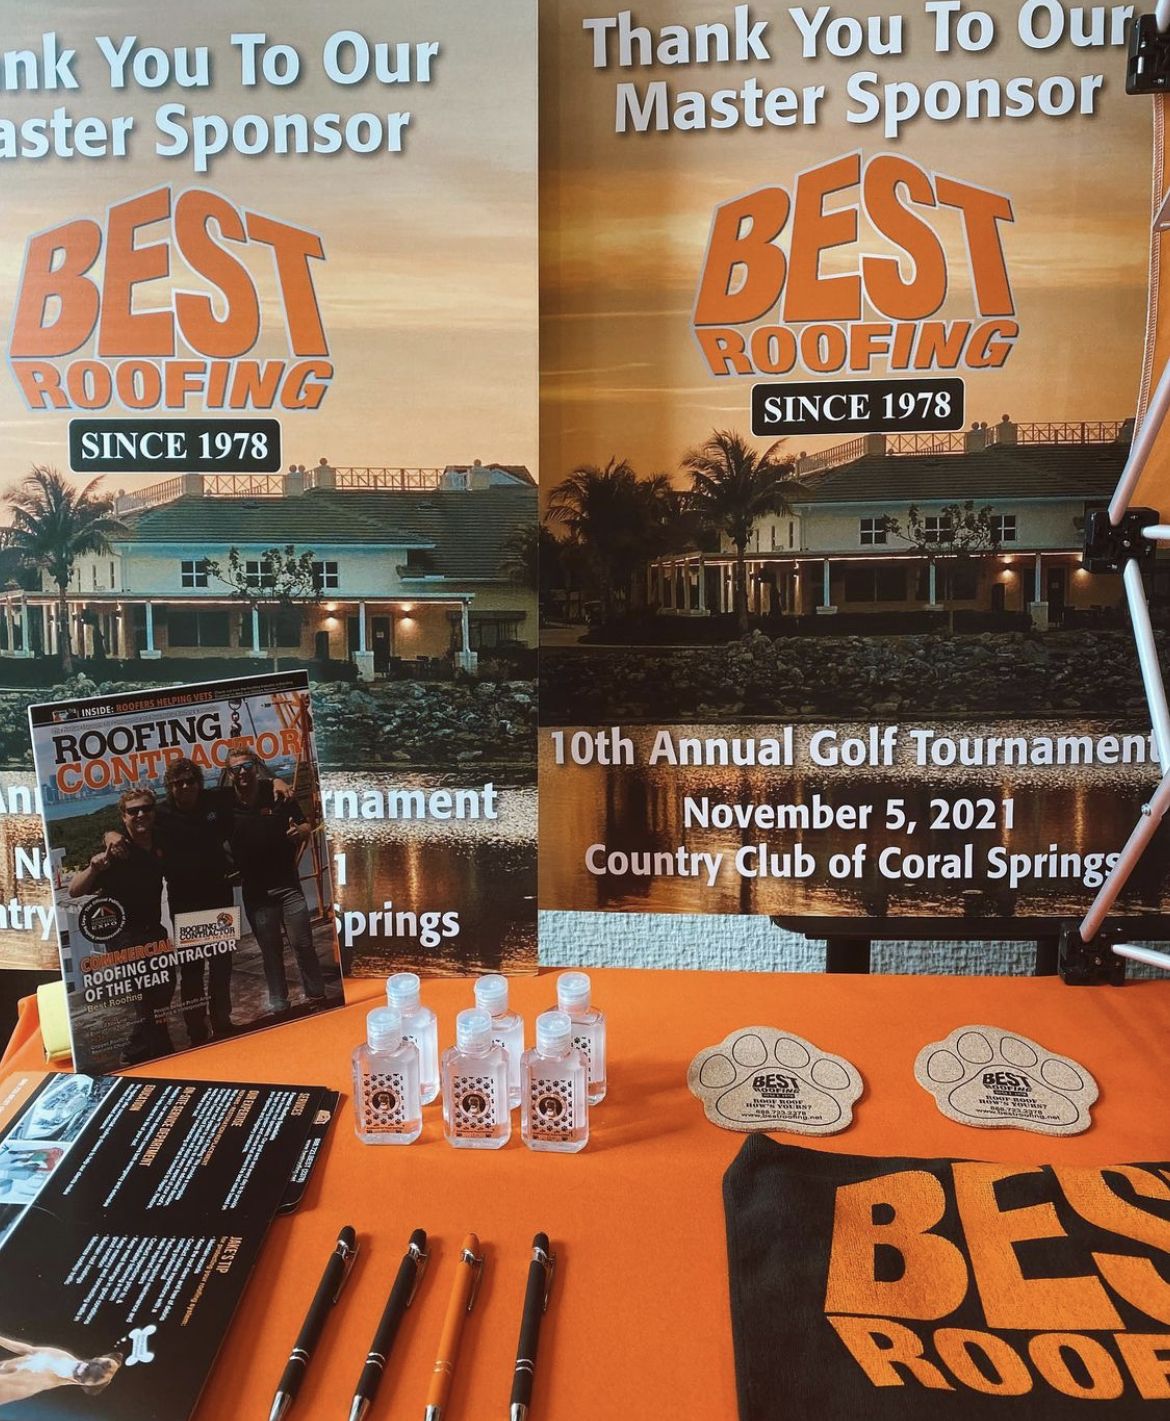 Our booth at the IFMA Golf Tournament